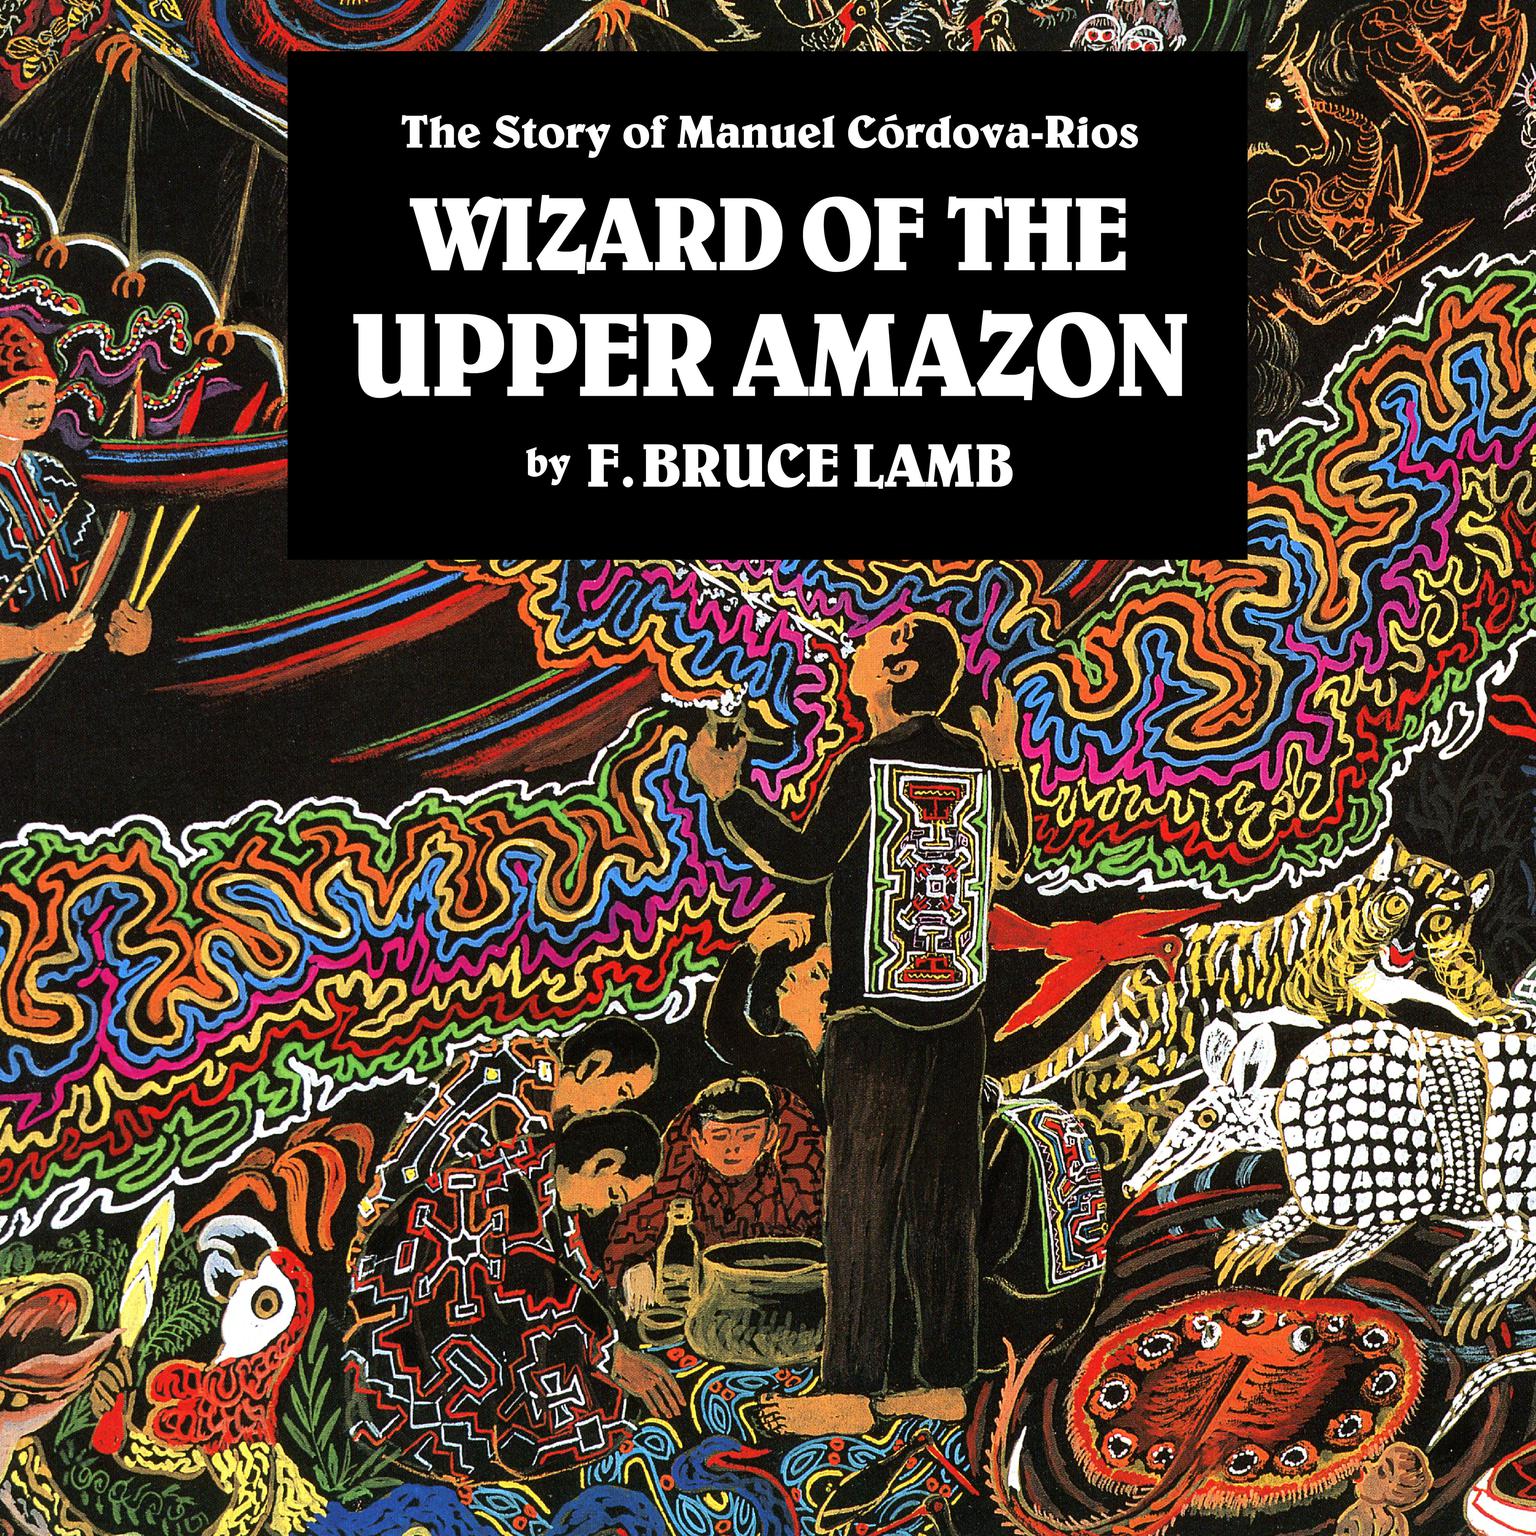 Wizard of the Upper Amazon: The Story of Manuel Córdova-Rios Audiobook, by F. Bruce Lamb